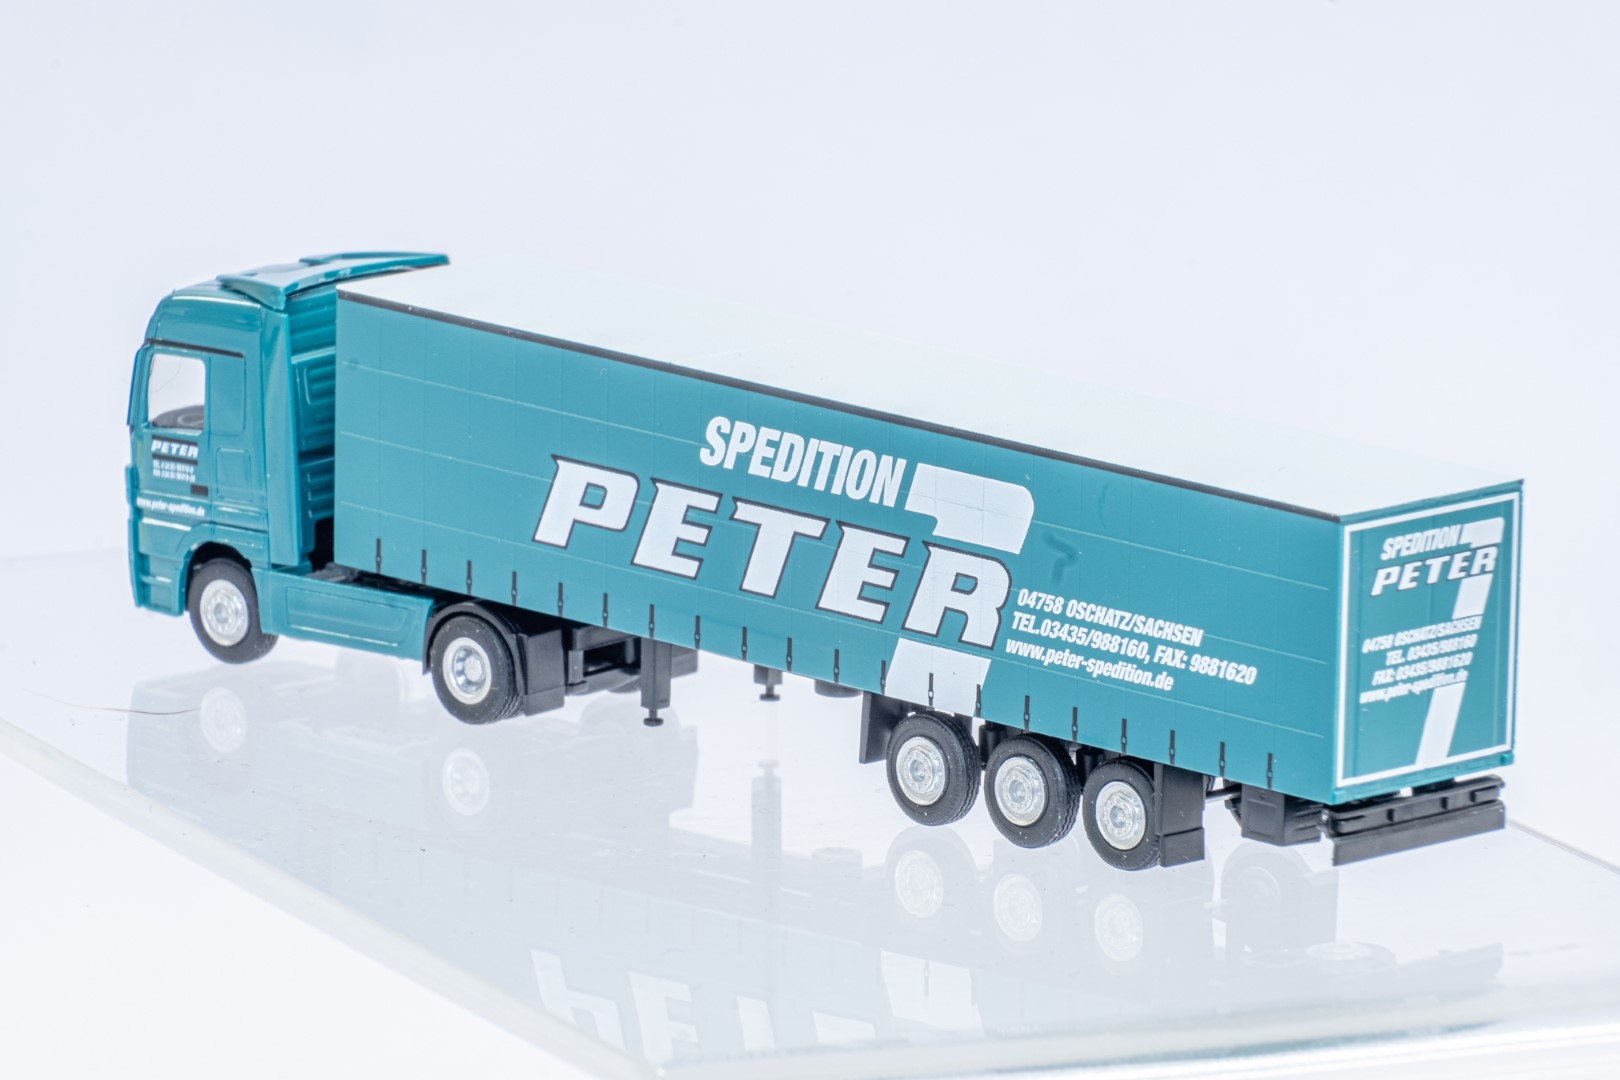 Herpa Merc Actros Box Trailer - Peter Spedition - Image 6 of 8